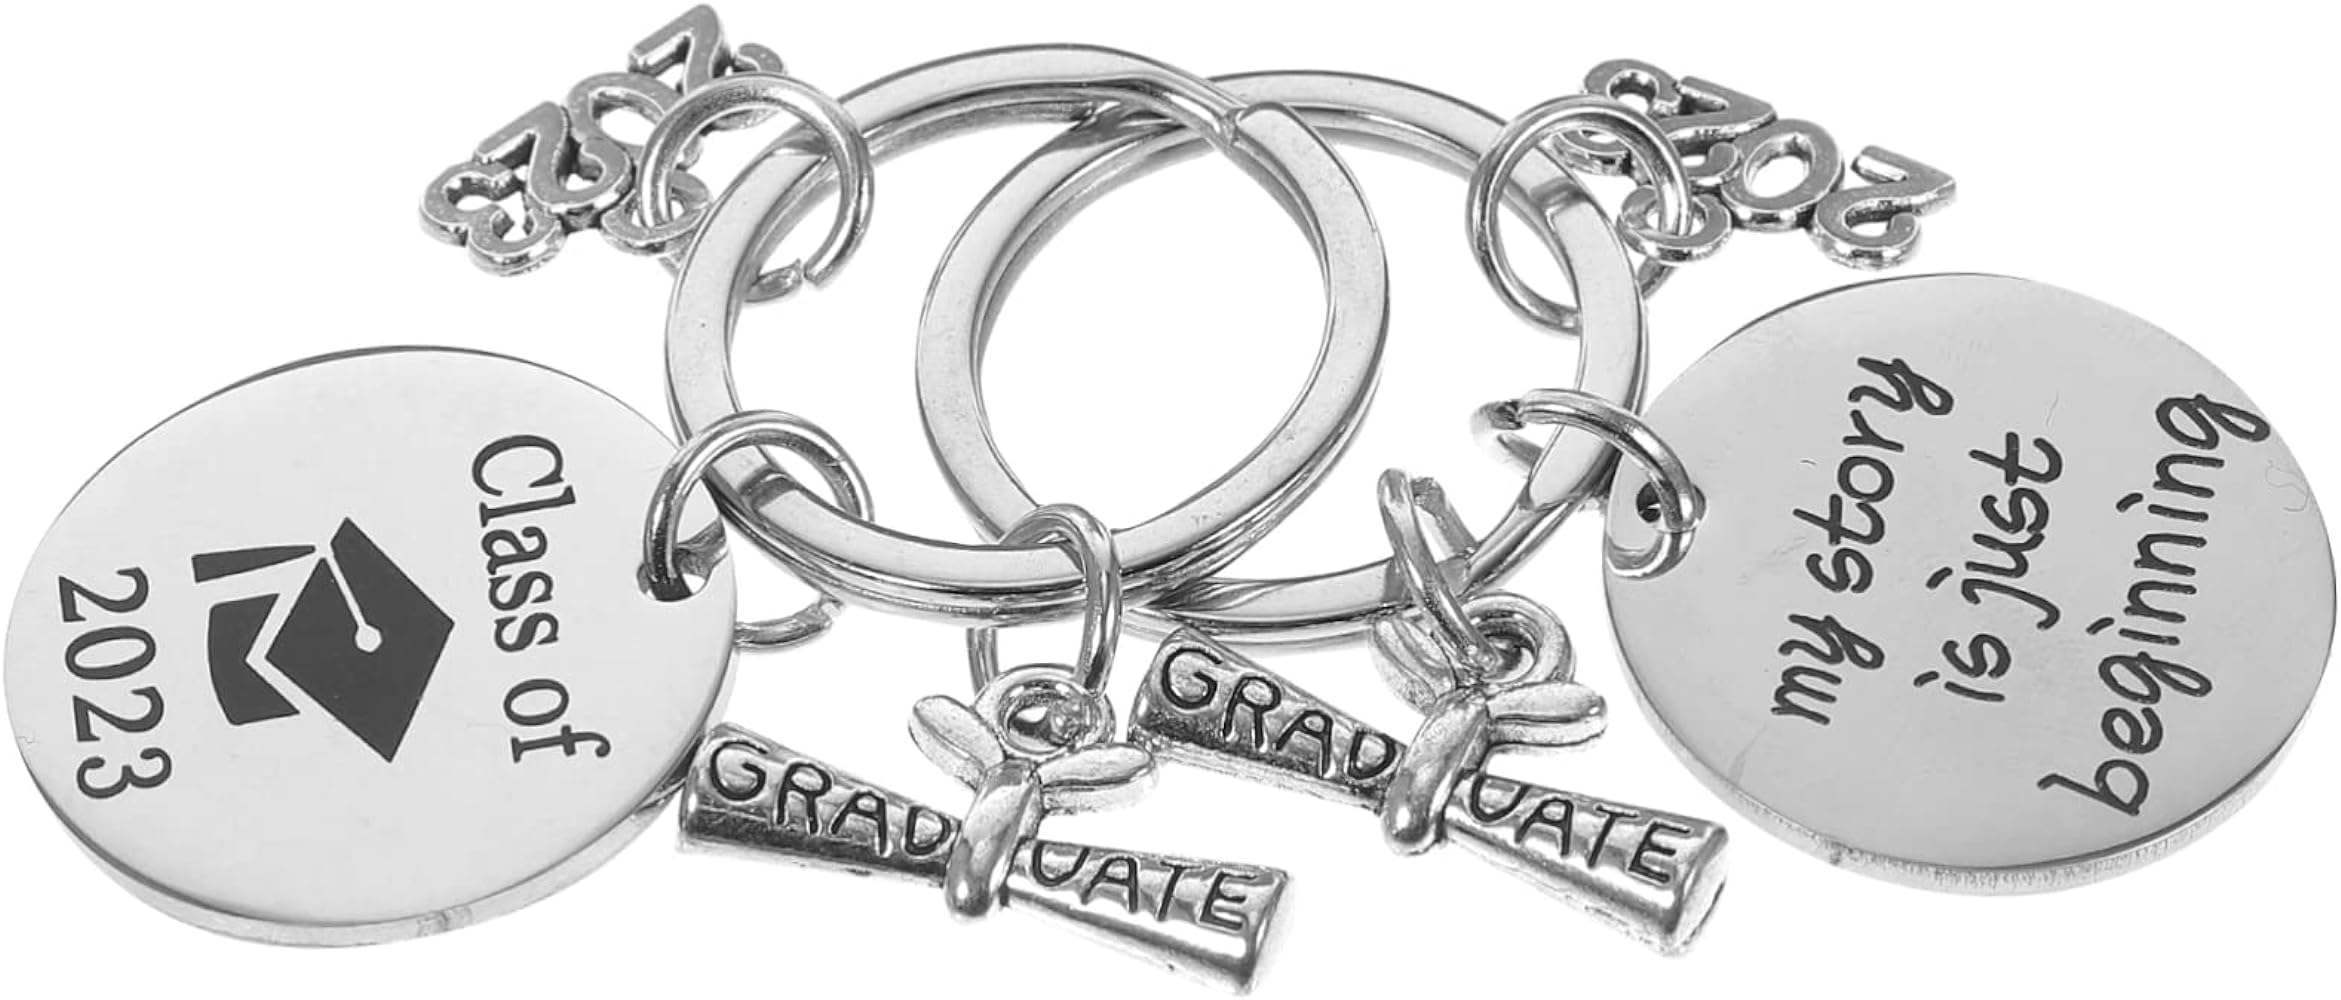 Sherchpry pcs graduation season keychain graduation keychain graduation cap keychain graduation gifts my story is just beginning class of stainless steel miss graduate jewelry at womens clothing store